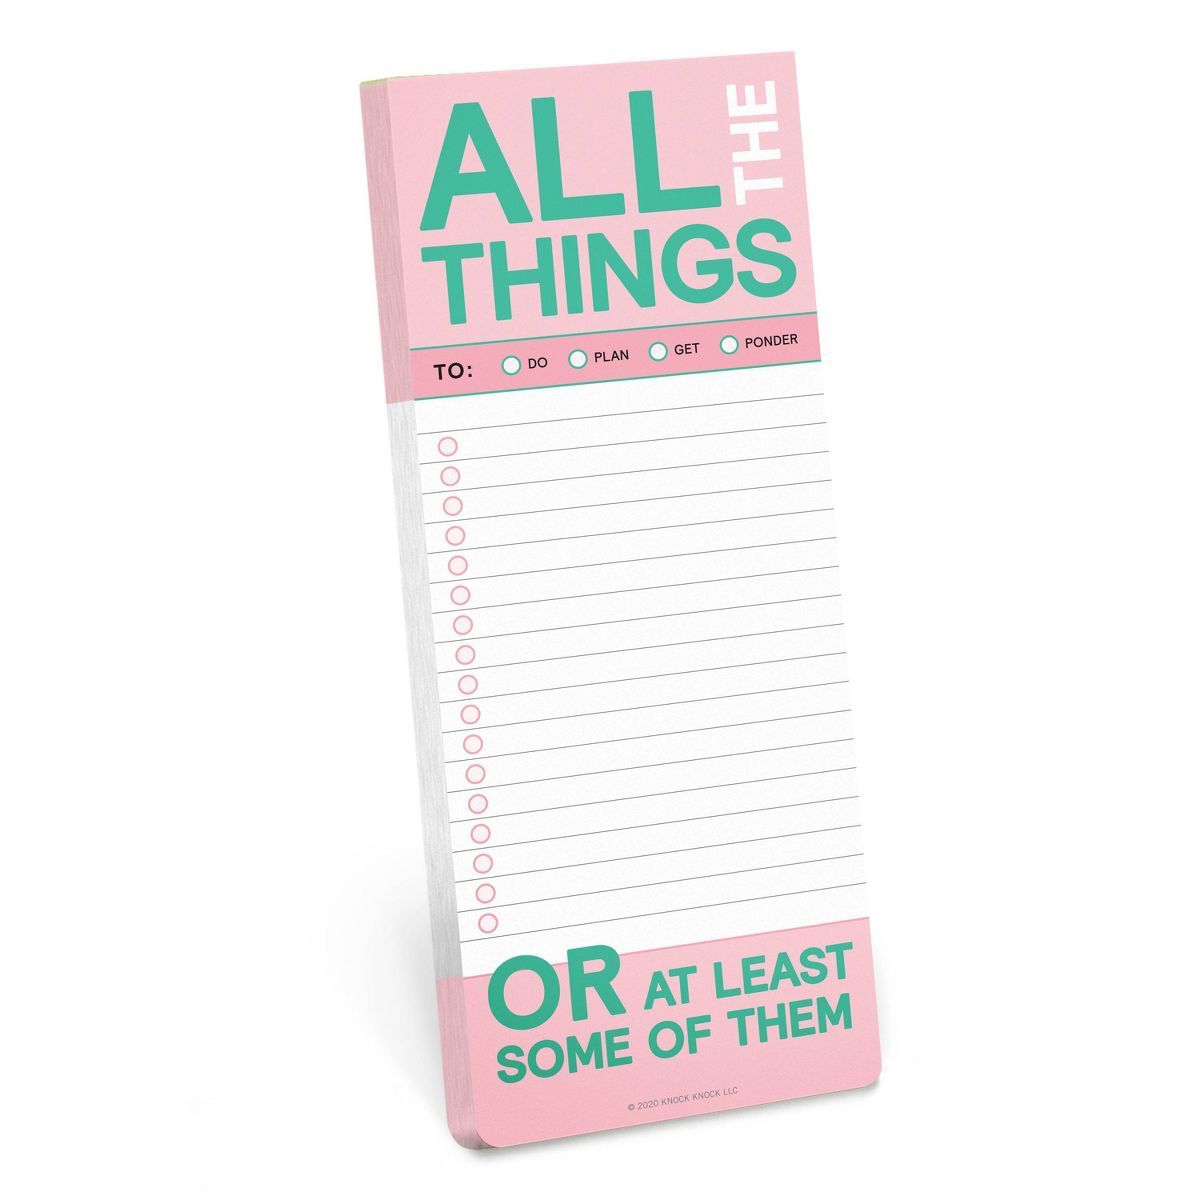 Knock Knock 3.5"x9" 'All The Things Make A List Pad' Shopping List Pad and To Do Pad | Target